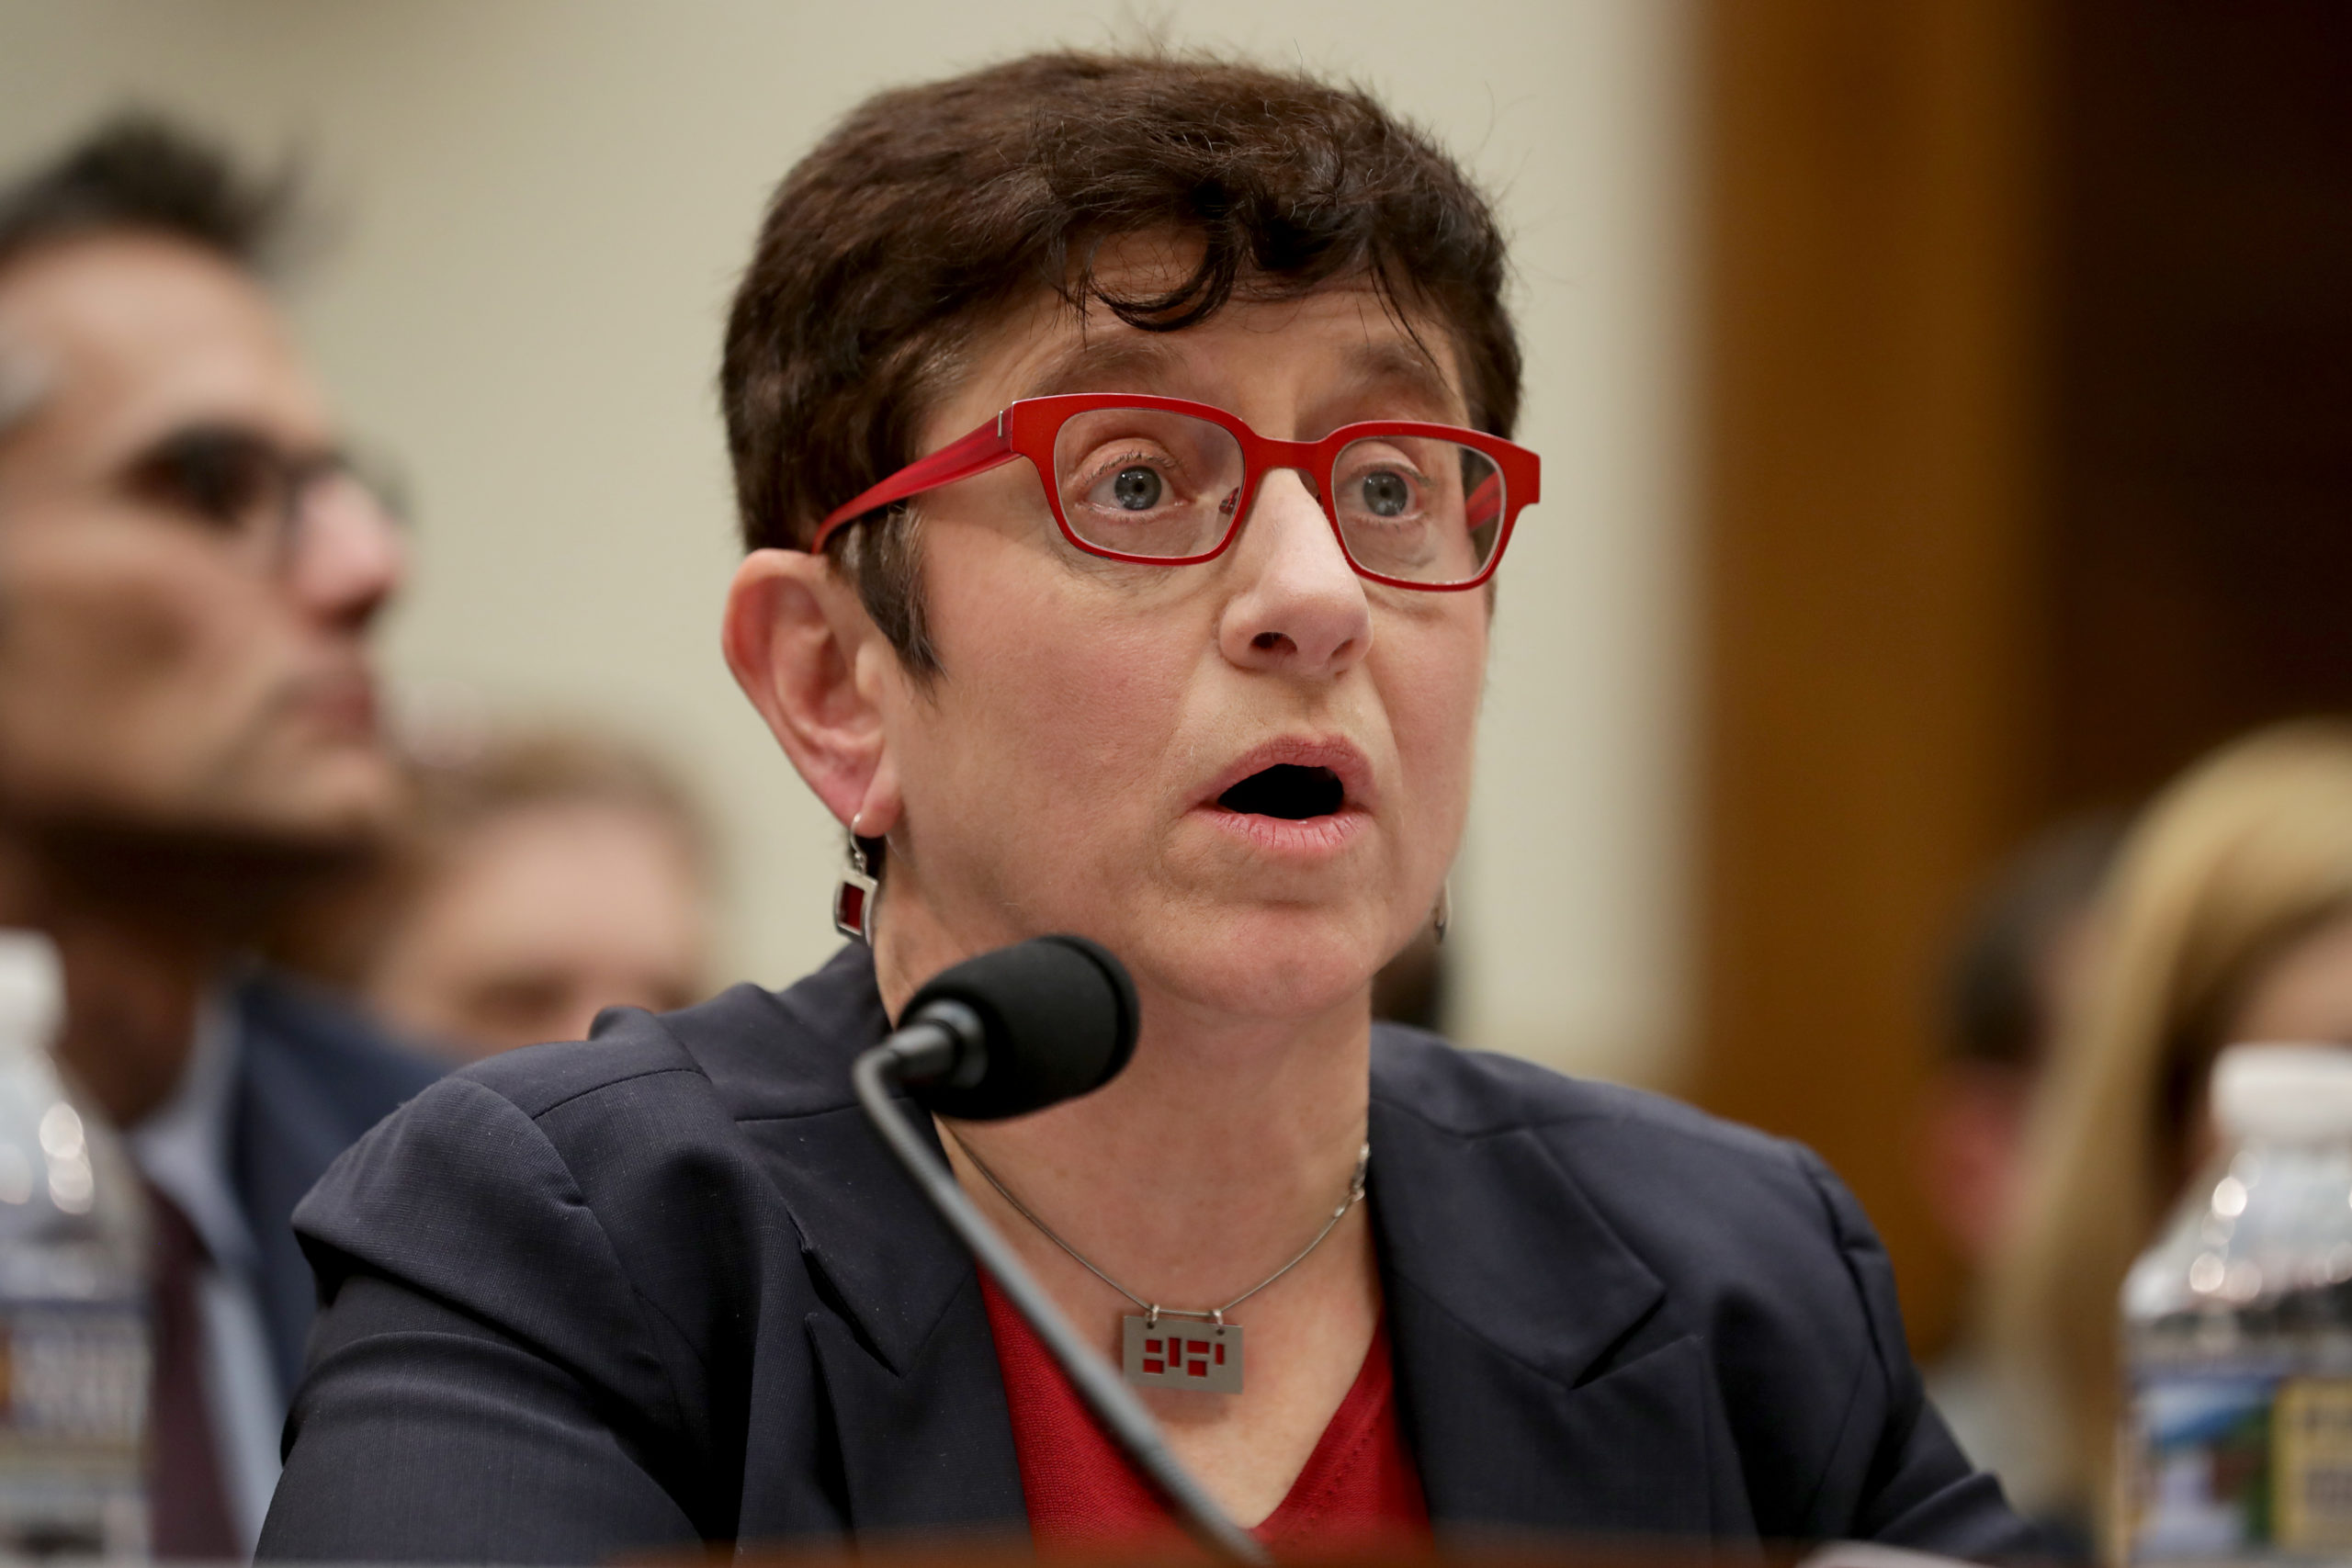 WASHINGTON, DC - MARCH 12: Georgetown University Law Institute for Technology Law and Policy fellow Gigi Sohn testifies before the House Judiciary Committee's Antitrust, Commercial and Administrative Law Subcommittee in the Rayburn House Office Building on Capitol Hill March 12, 2019 in Washington, DC. The subcommittee heard testimony from corporate leaders and other experts testified about the "state of competition in the wireless market" and the possible impacts of the proposed merger of T-Mobile and Sprint would have on consumers in rural areas, workers and the future of 5G broadband internet access. (Photo by Chip Somodevilla/Getty Images)